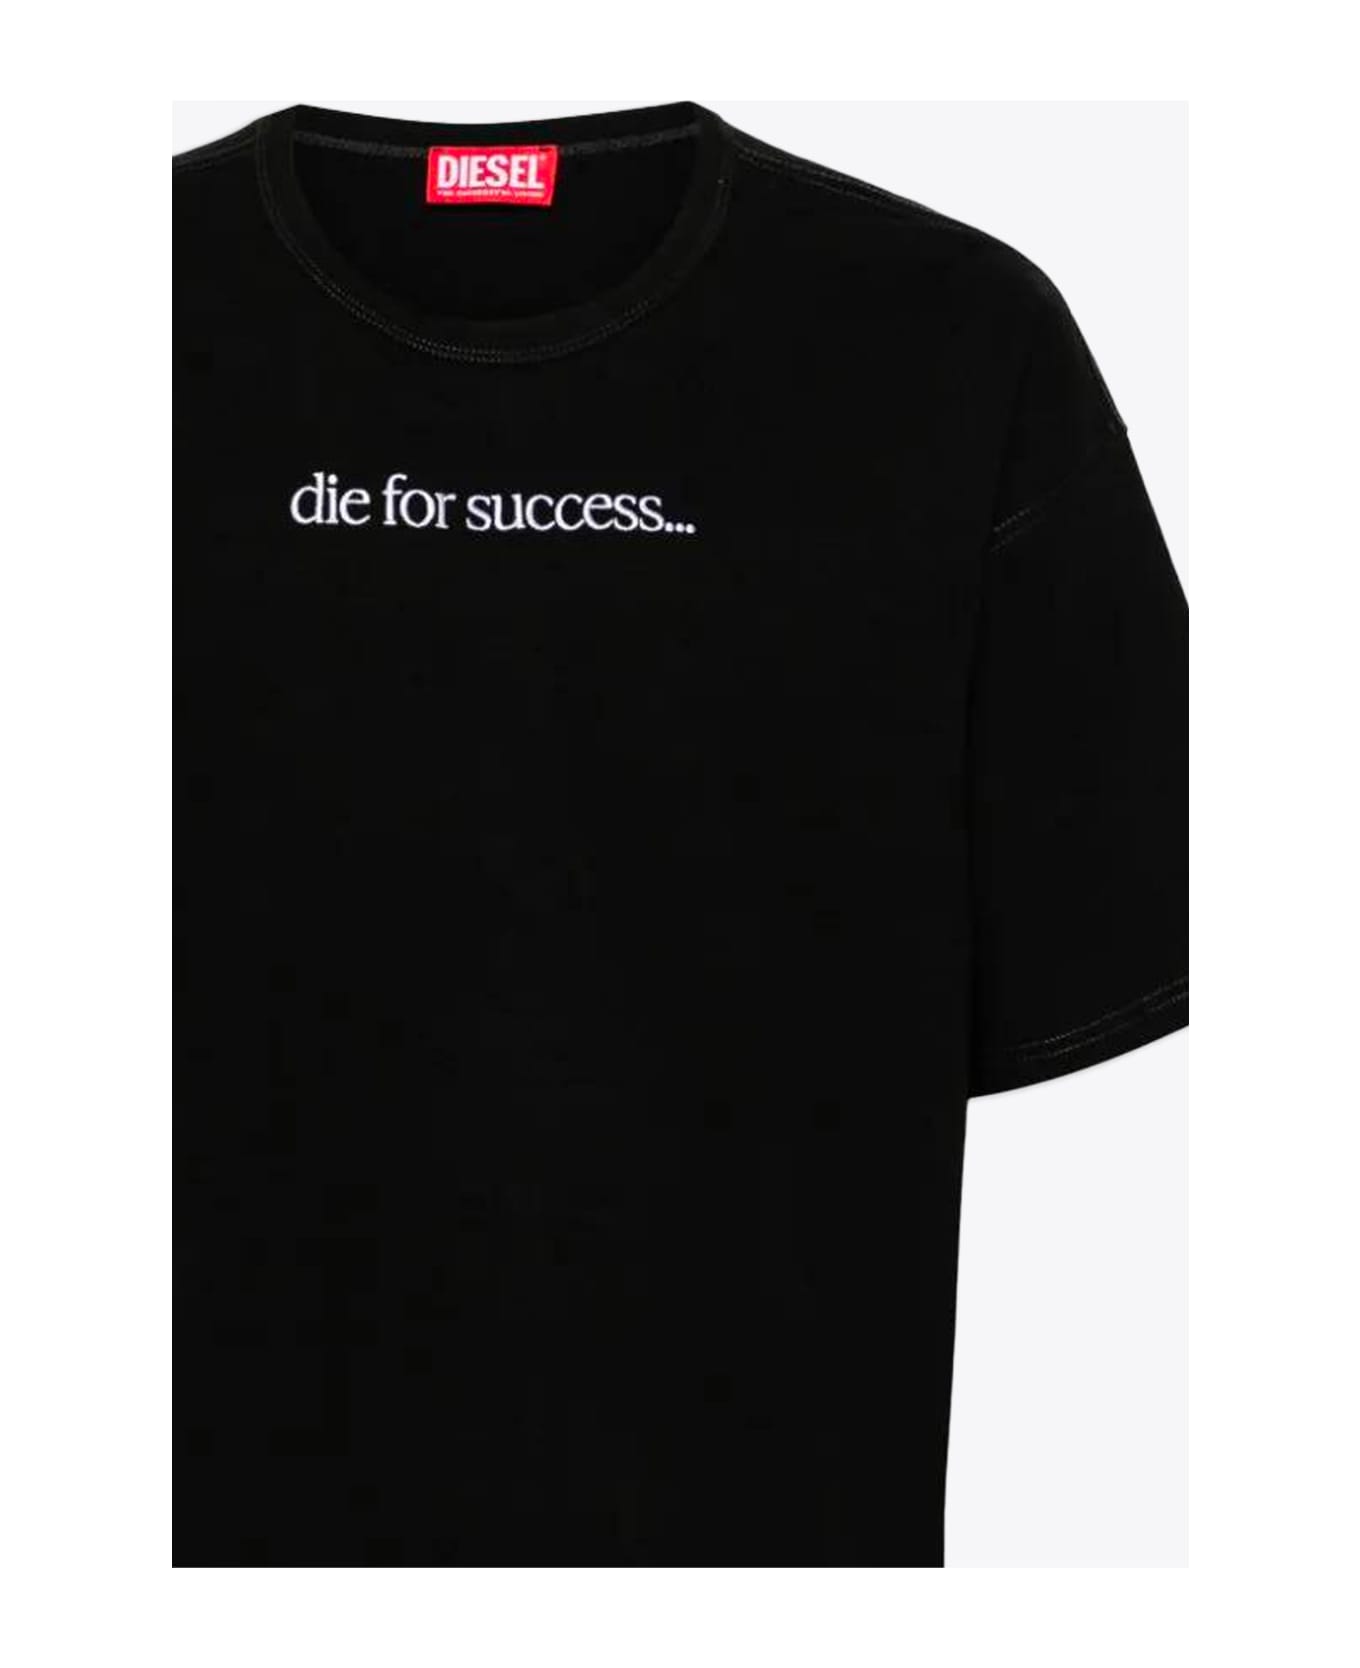 Diesel 0nfae T-box-n6 Black cotton t-shirt with front slogan embroidery - T Boxt N6 - Nero シャツ